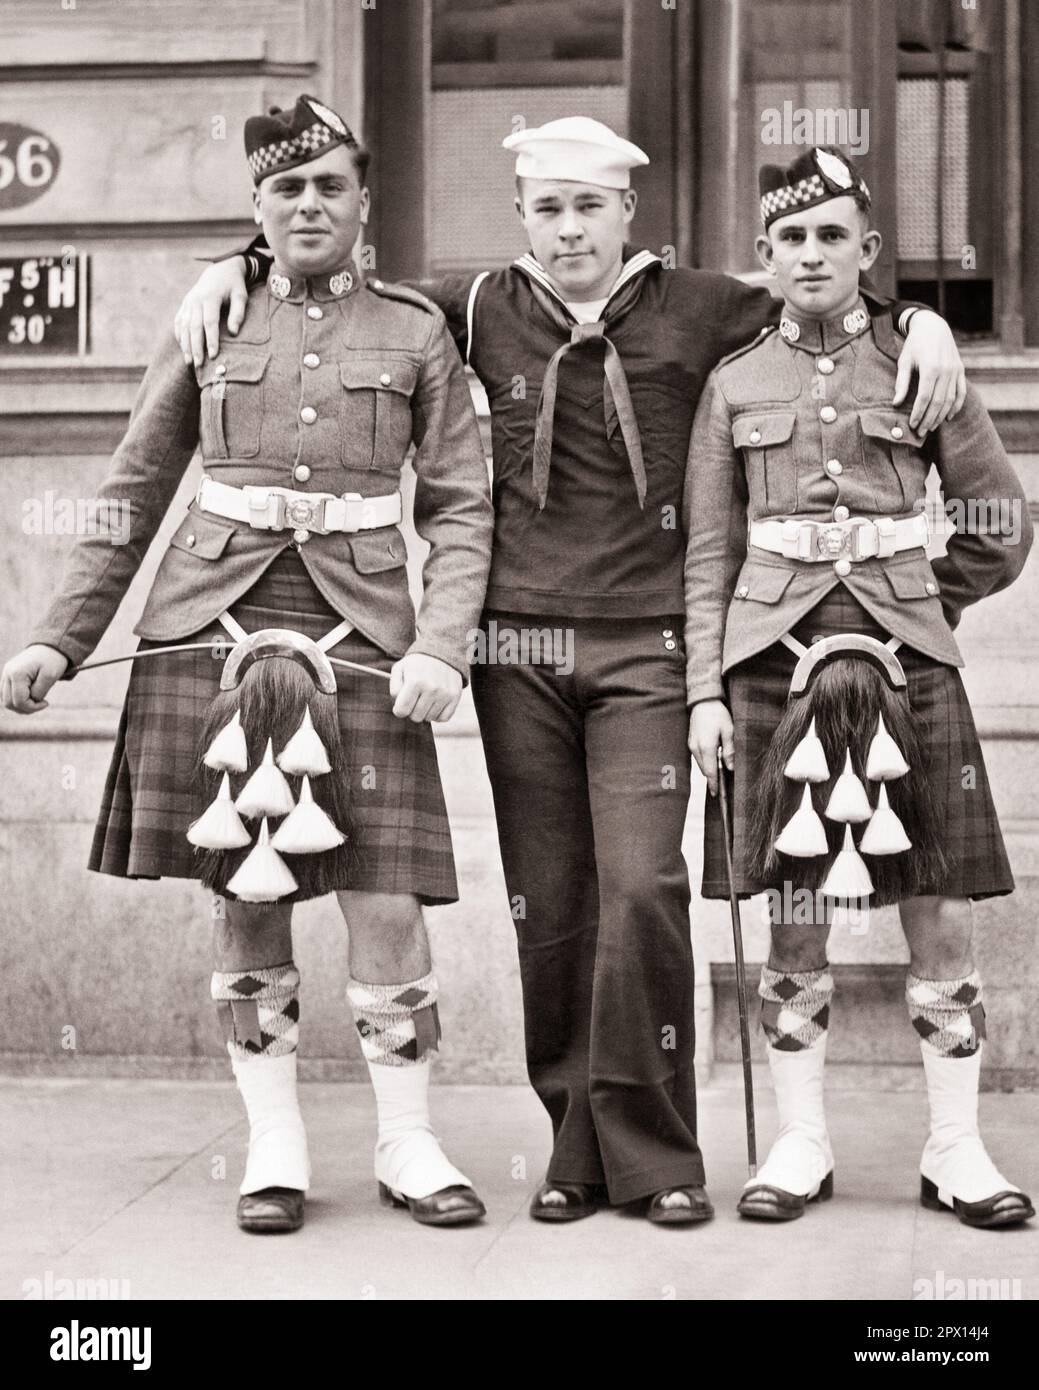 1940s AMERICAN SAILOR IN UNIFORM POSING WITH TWO MEMBERS OF THE SCOTTISH ARGYLL & SUTHERLAND HIGHLANDERS IN ENGLAND DURING WW2 - q75039 CPC001 HARS WORLD WARS PRIDE WORLD WAR WORLD WAR TWO WORLD WAR II GLEN POSING UNIFORMS FORCES GLENGARRY SCOTS FRIENDLY MEMBERS NAVIES SPORRANS STYLISH WORLD WAR 2 KILTS MID-ADULT MID-ADULT MAN POSED SUTHERLAND TOGETHERNESS YANK YOUNG ADULT MAN BLACK AND WHITE CAUCASIAN ETHNICITY OLD FASHIONED Stock Photo